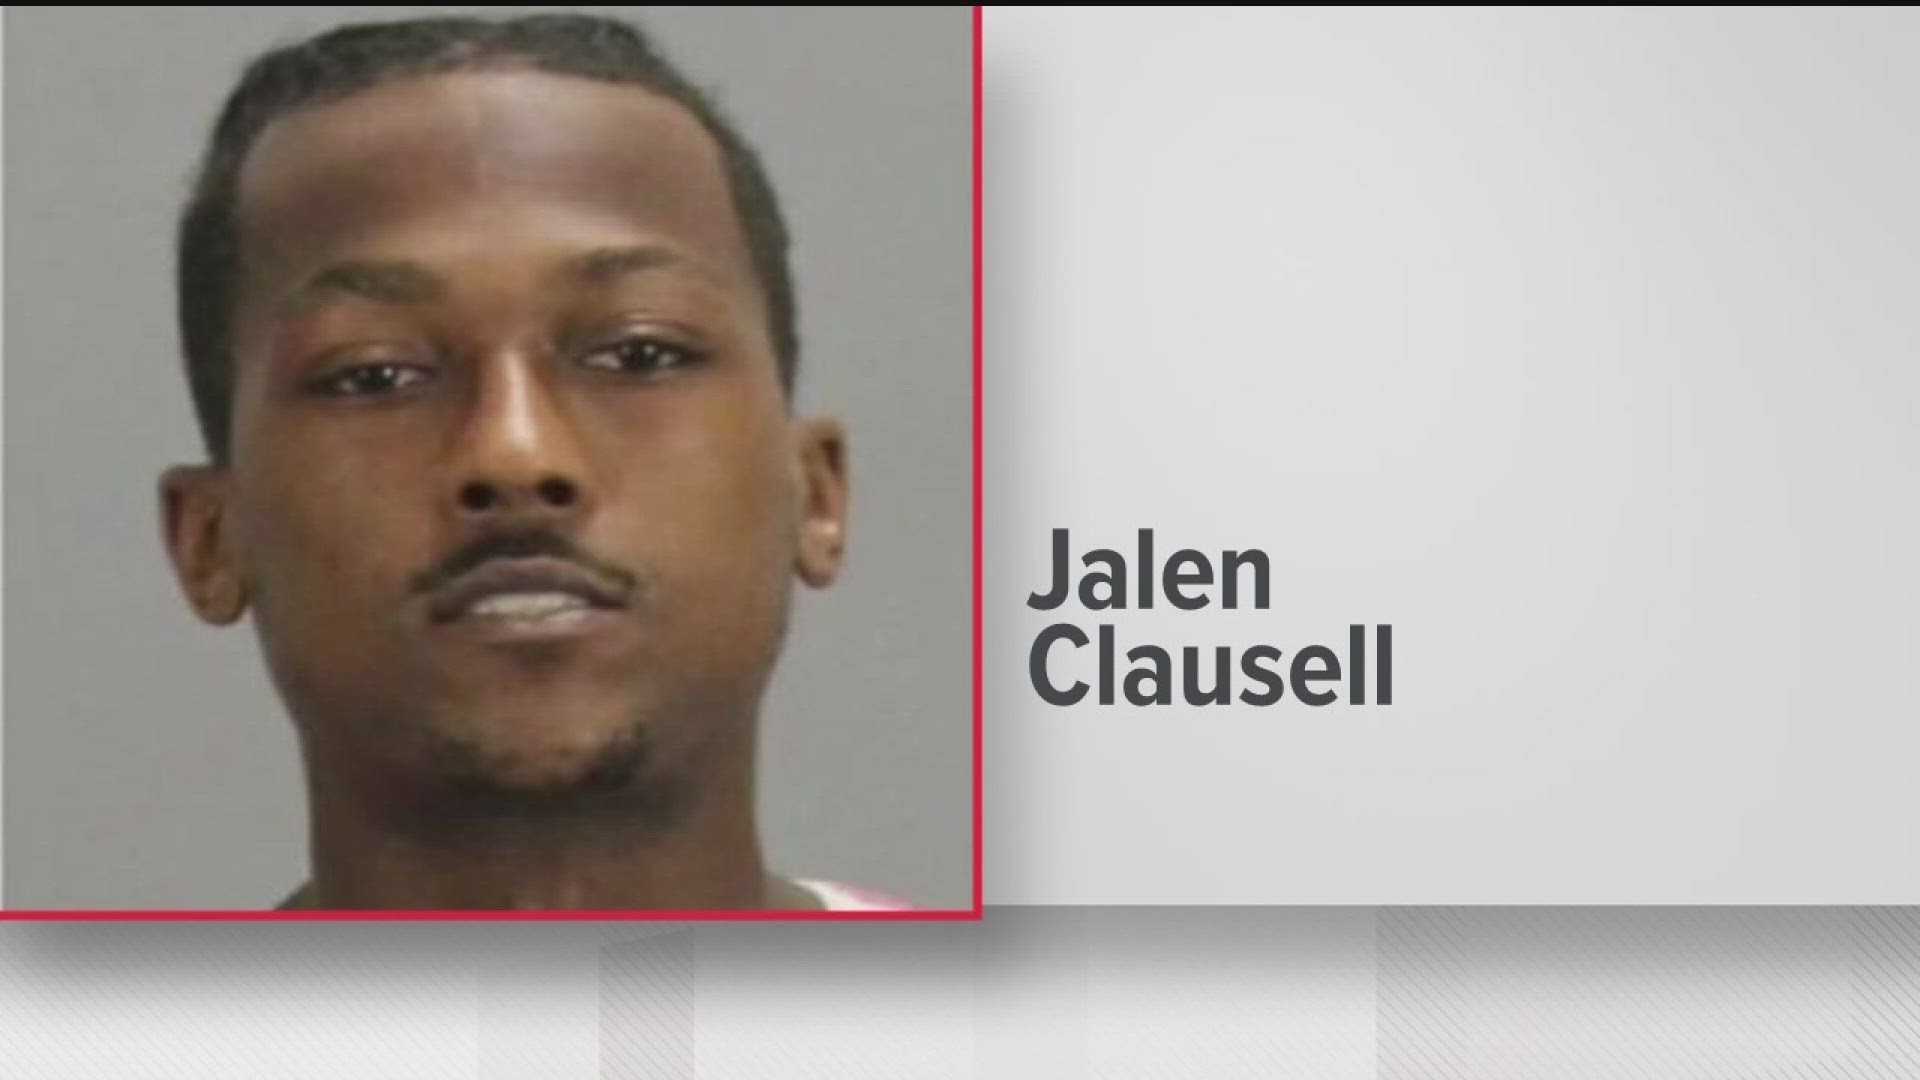 Jalen Clausell is accused of helping to facilitate the assault. He's now facing charges along with four other inmates.